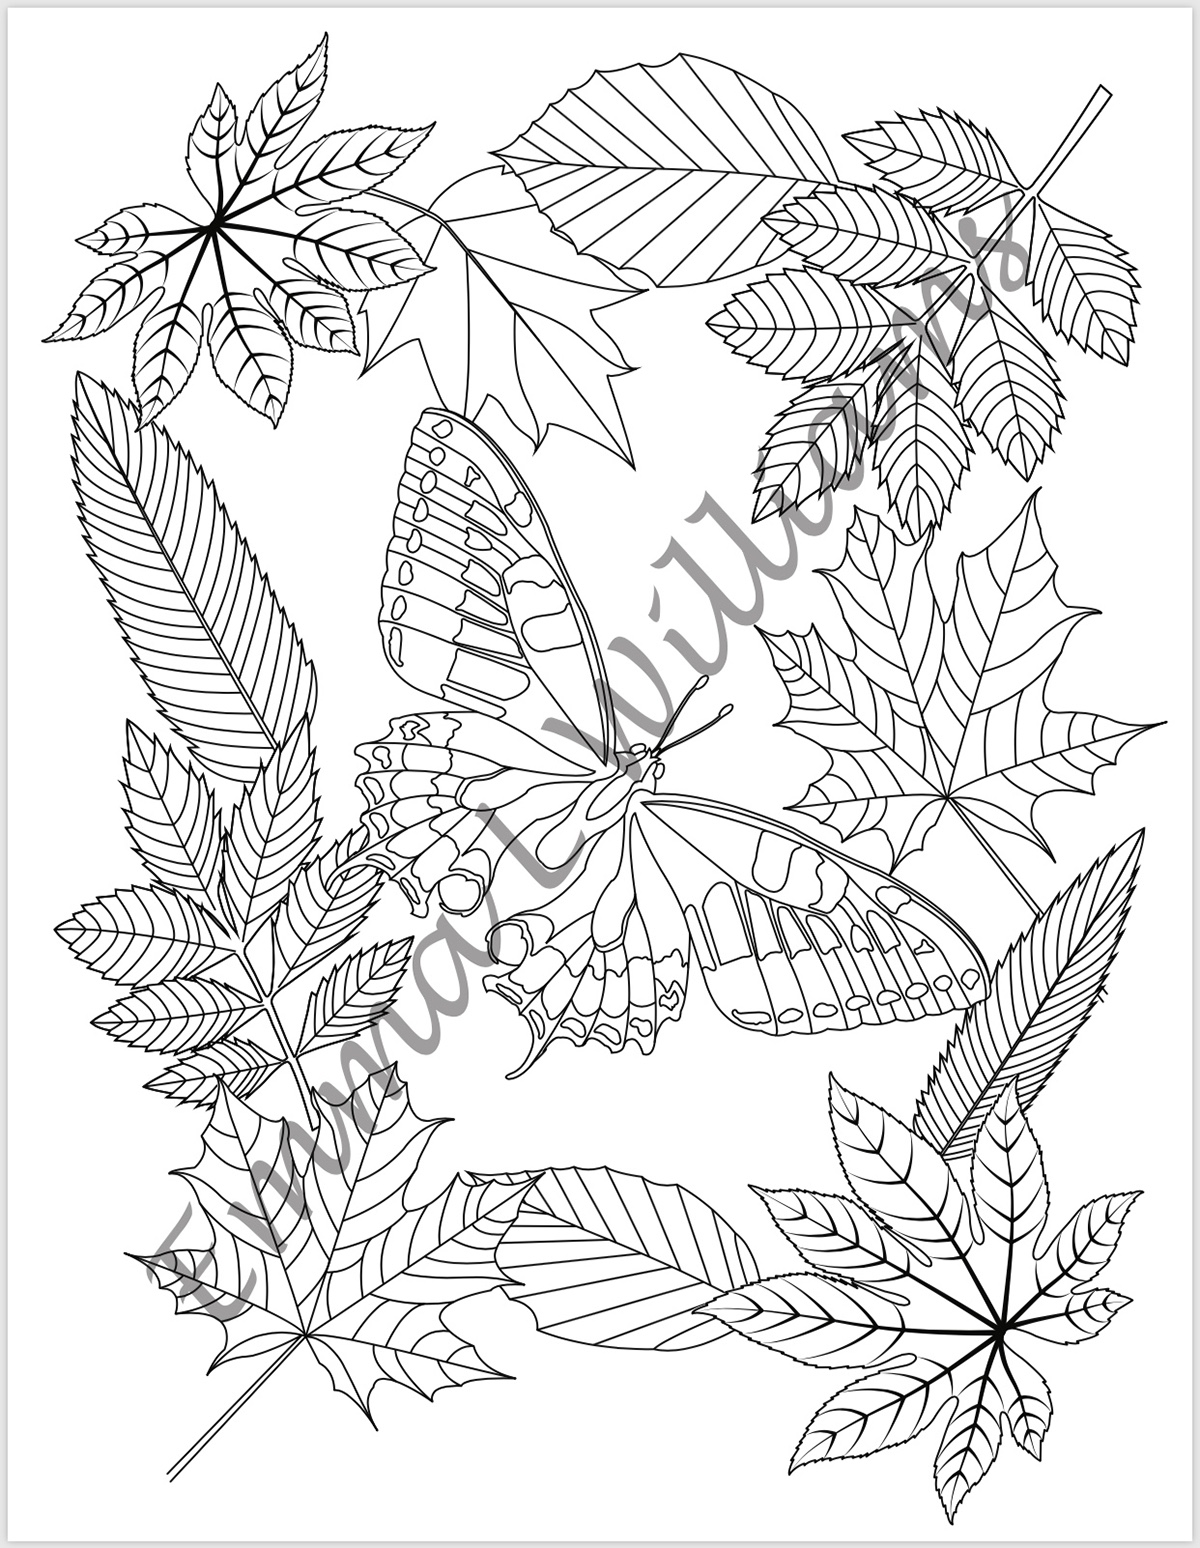 butterfly Nature garden COLOURING adult colouring colouring book Flowers floral black and white design art